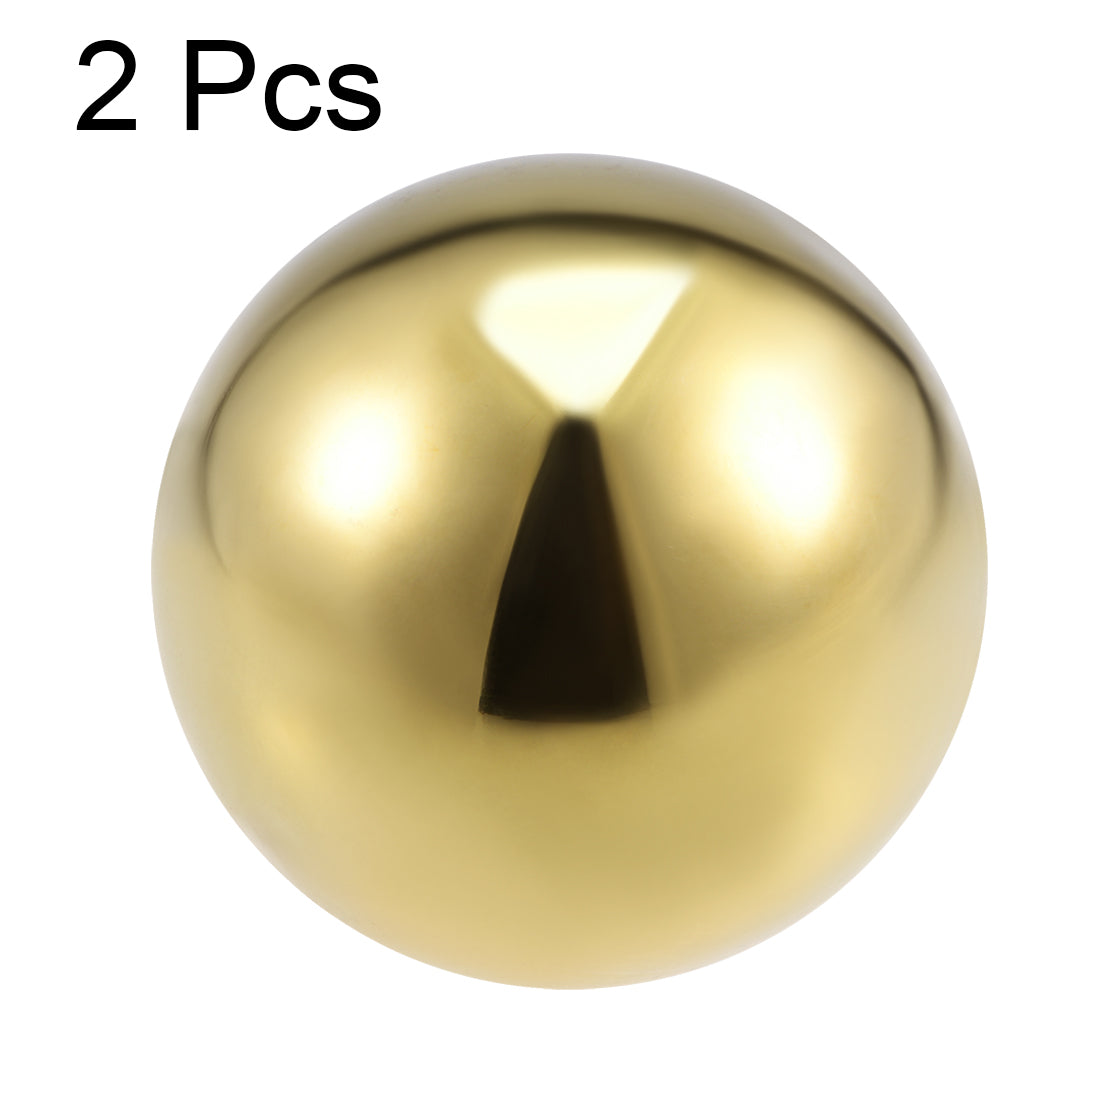 uxcell Uxcell 50mm Dia 201 Stainless Steel Hollow Cap Ball Spheres for Handrail Stair Newel Post Gold Tone 2pcs